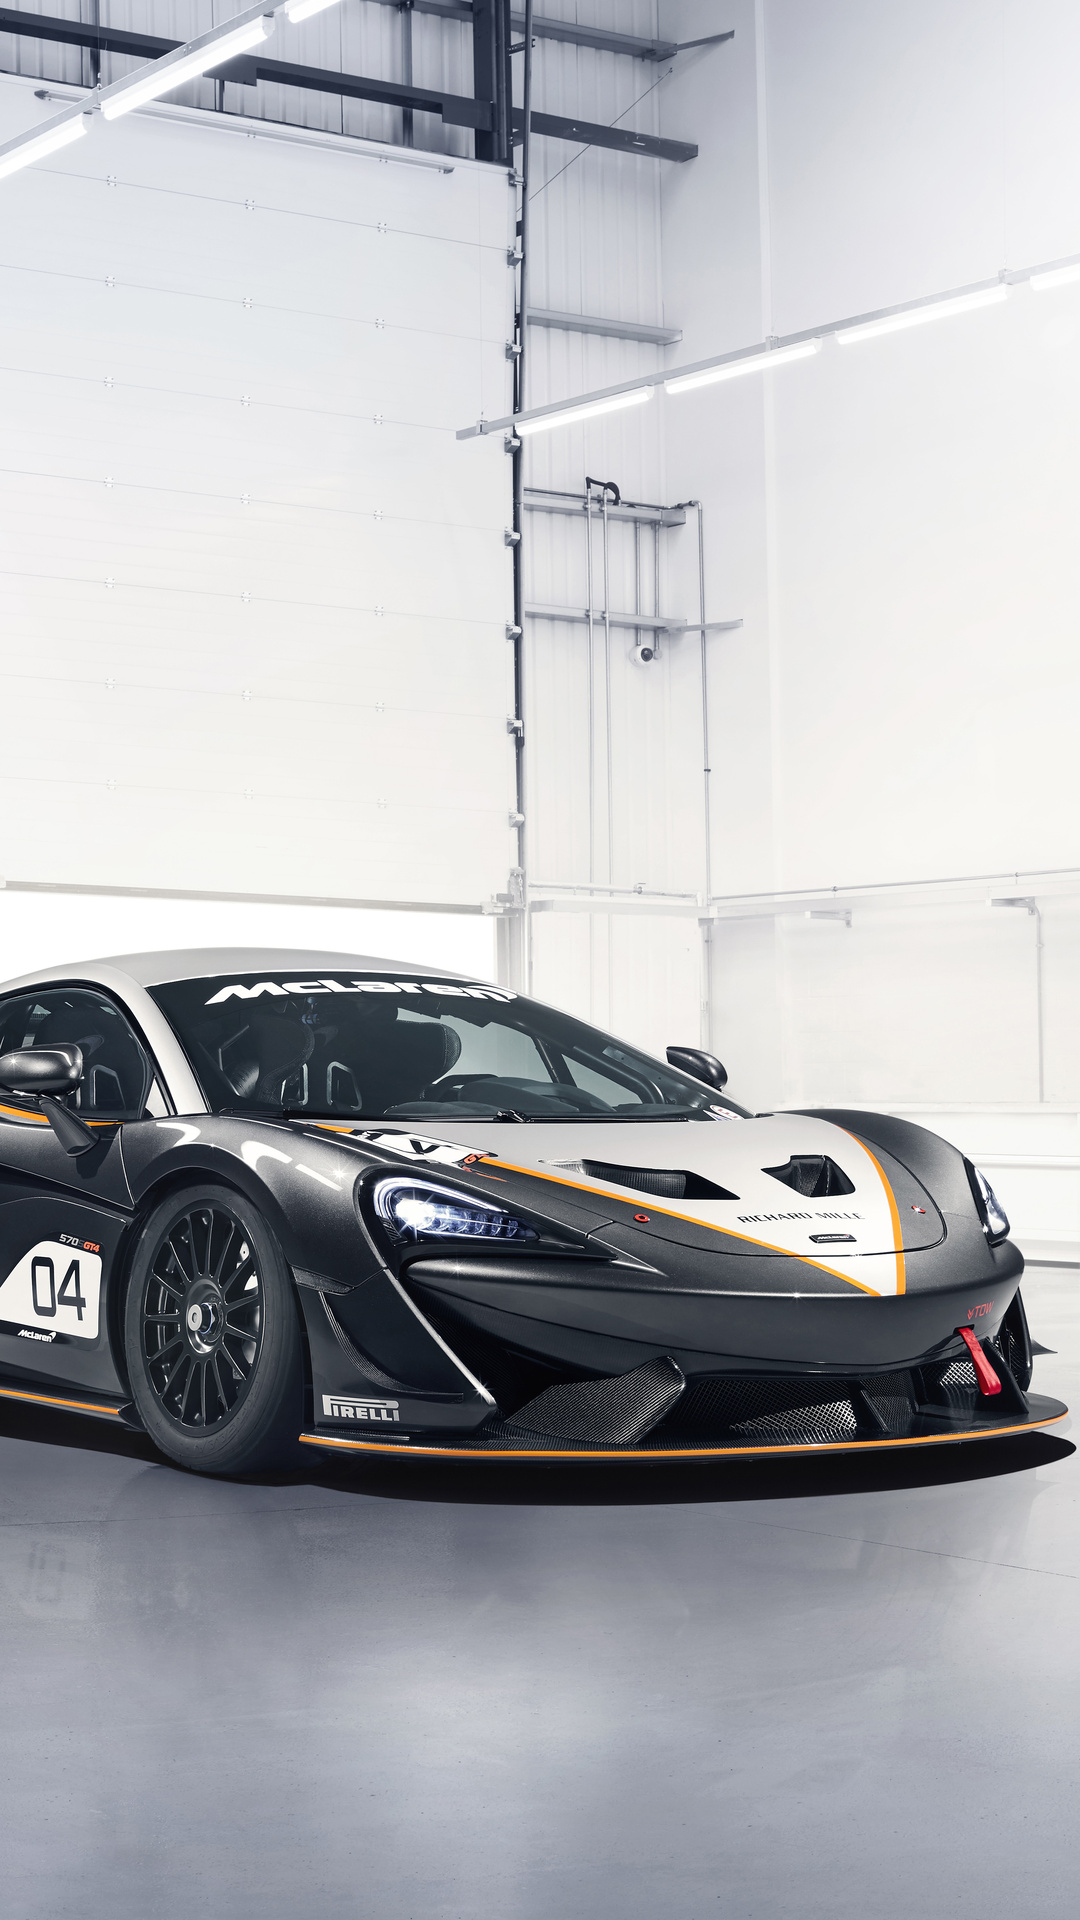 McLaren 570S GT4 10k iPhone 6s, 6 Plus, Pixel xl , One Plus 3t, 5 HD 4k Wallpaper, Image, Background, Photo and Picture